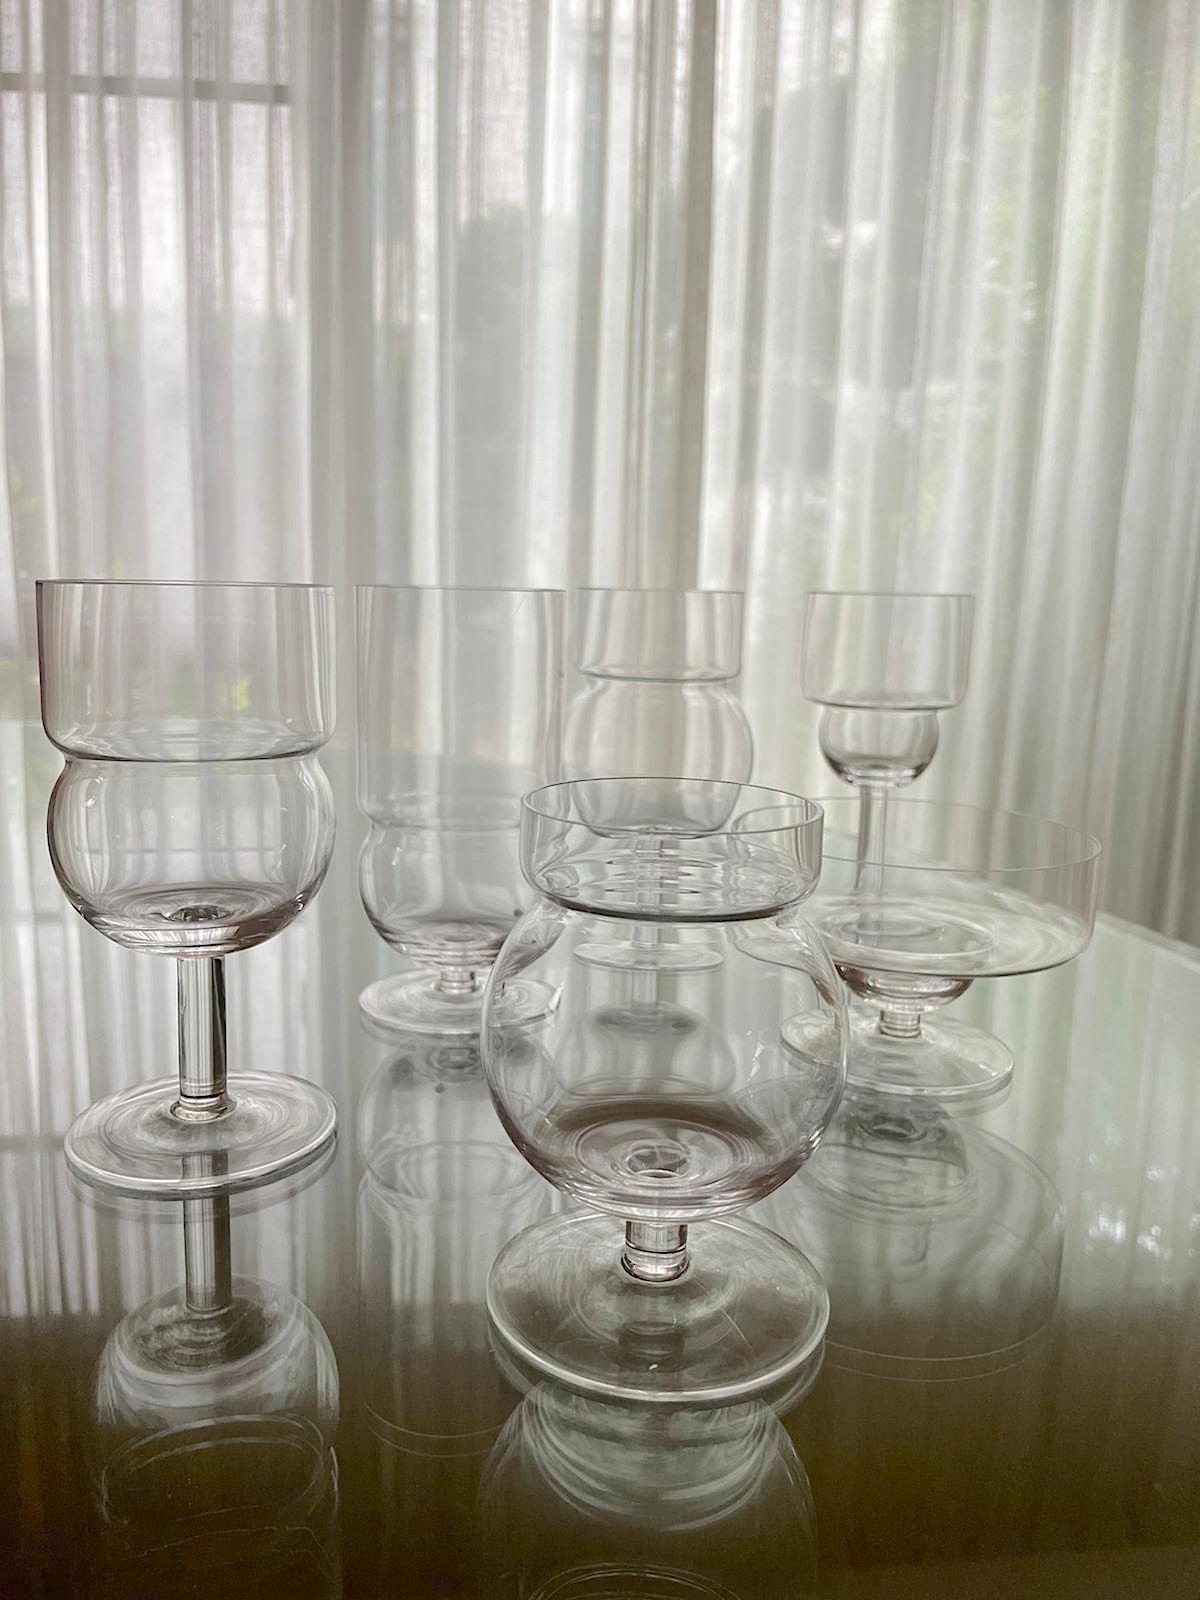 The Contra Brandy Glass by PROSE Tabletop